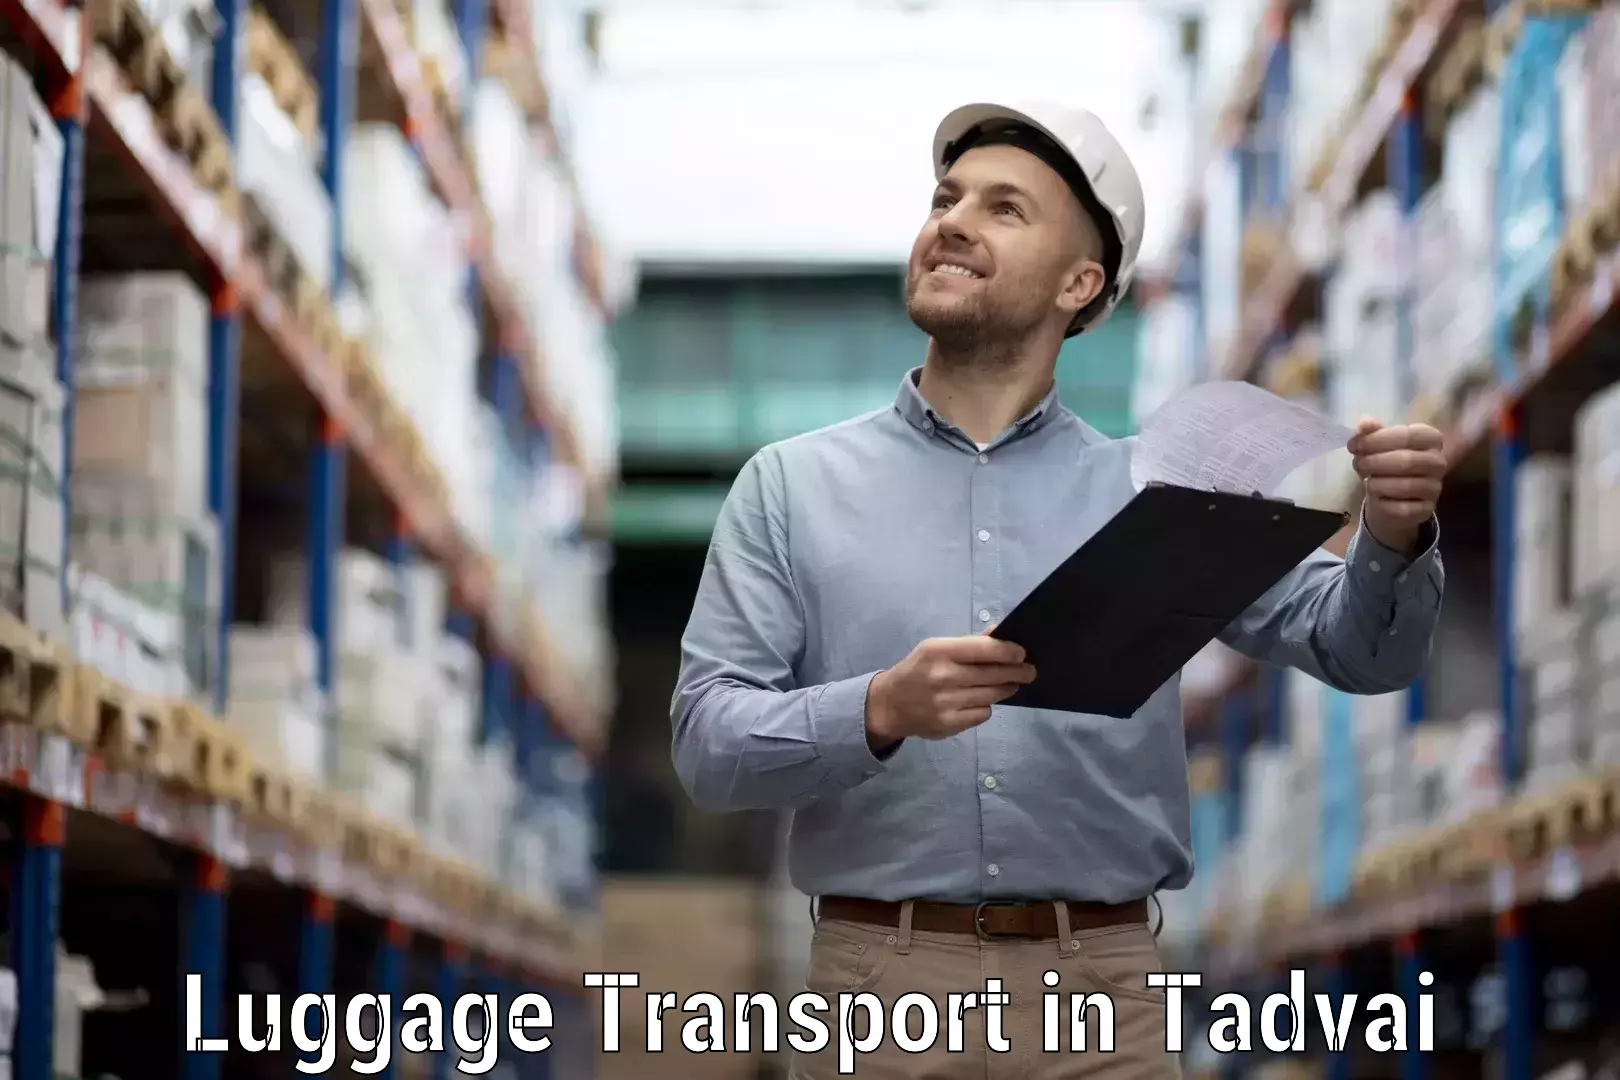 Luggage shipping strategy in Tadvai